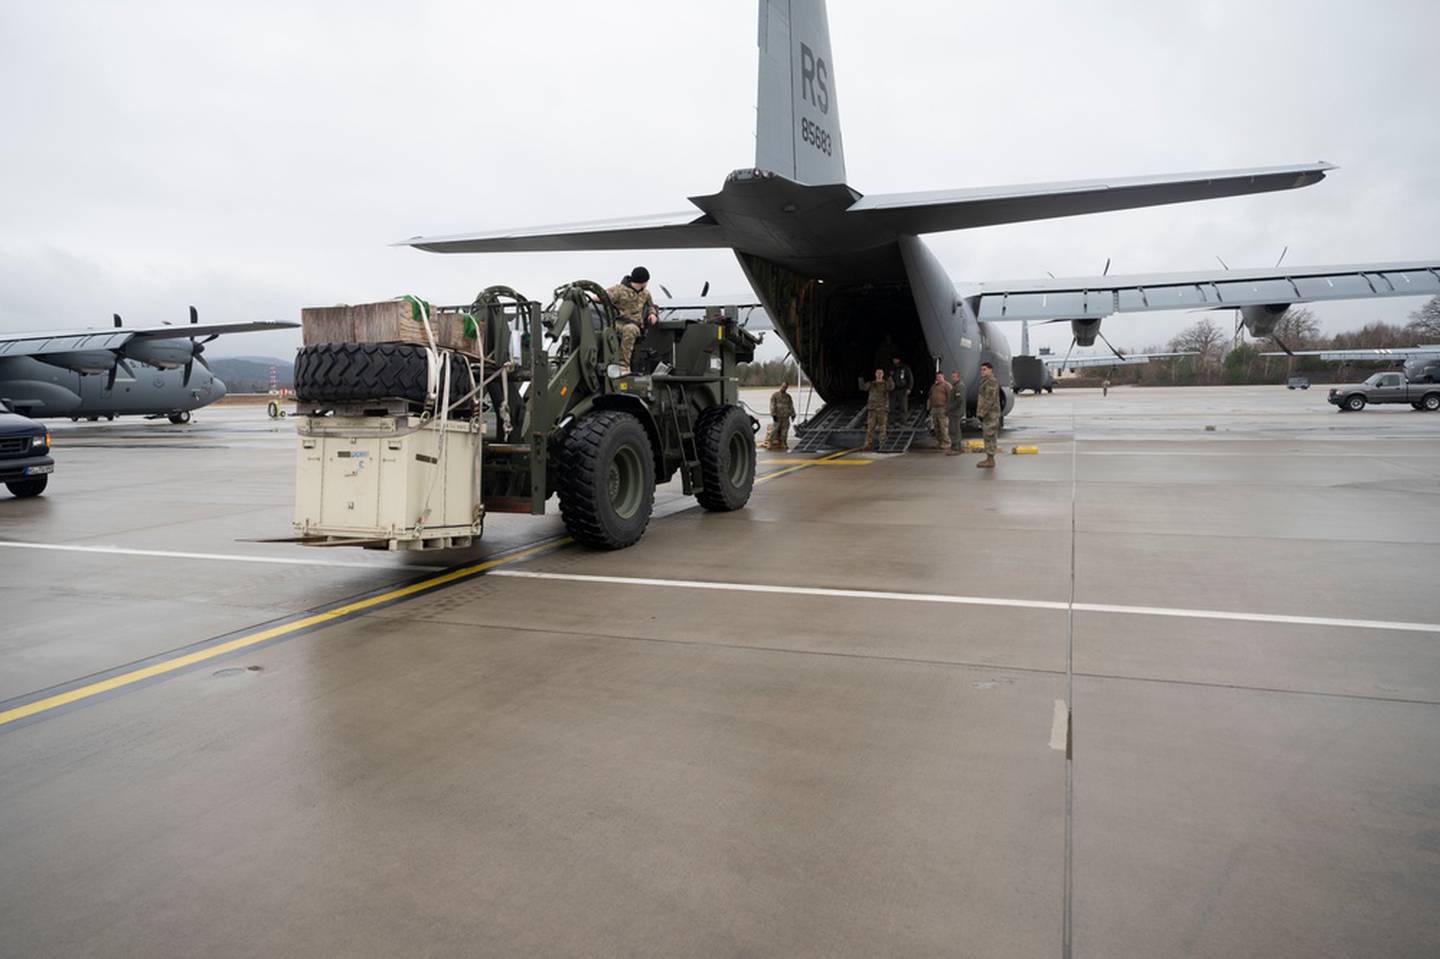 Airmen assigned to the 86th Airlift Wing load supplies onto a C-130J Super Hercules aircraft at Ramstein Air Base, Germany, Feb. 4, 2022. U.S. Air Forces in Europe are prepared and strategically positioned to rapidly surge forces into and across the region in order to support the alliance and defend against any aggression. (Senior Airman Thomas Karol/Air Force)